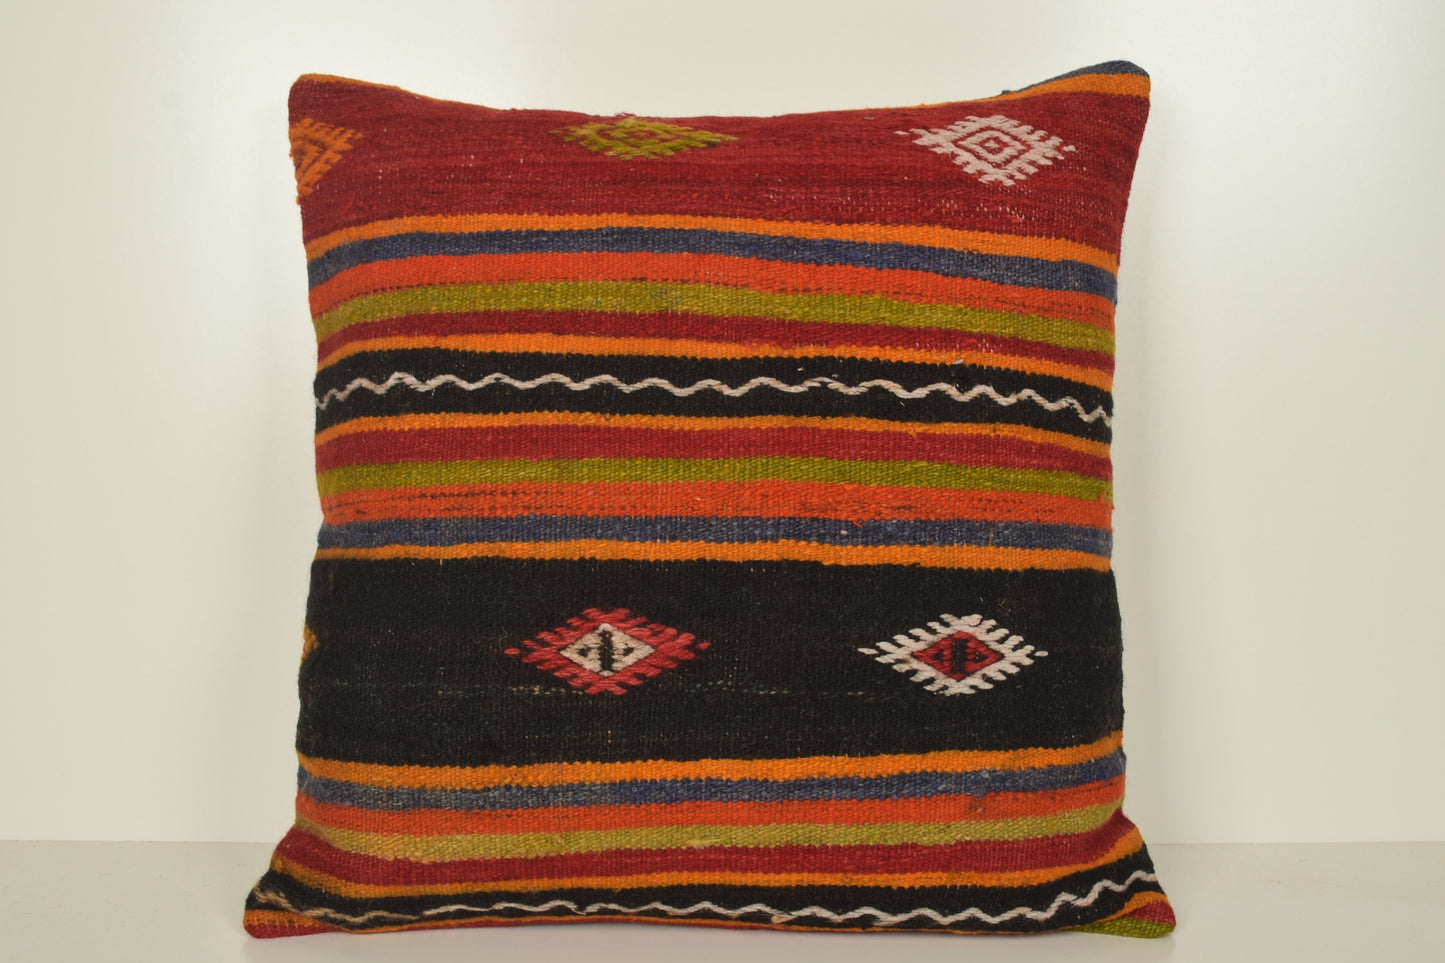 Kilim Pillow Covers for Sale A00868 Inexpensive pillow covers Moroccan pillow cases 24x24